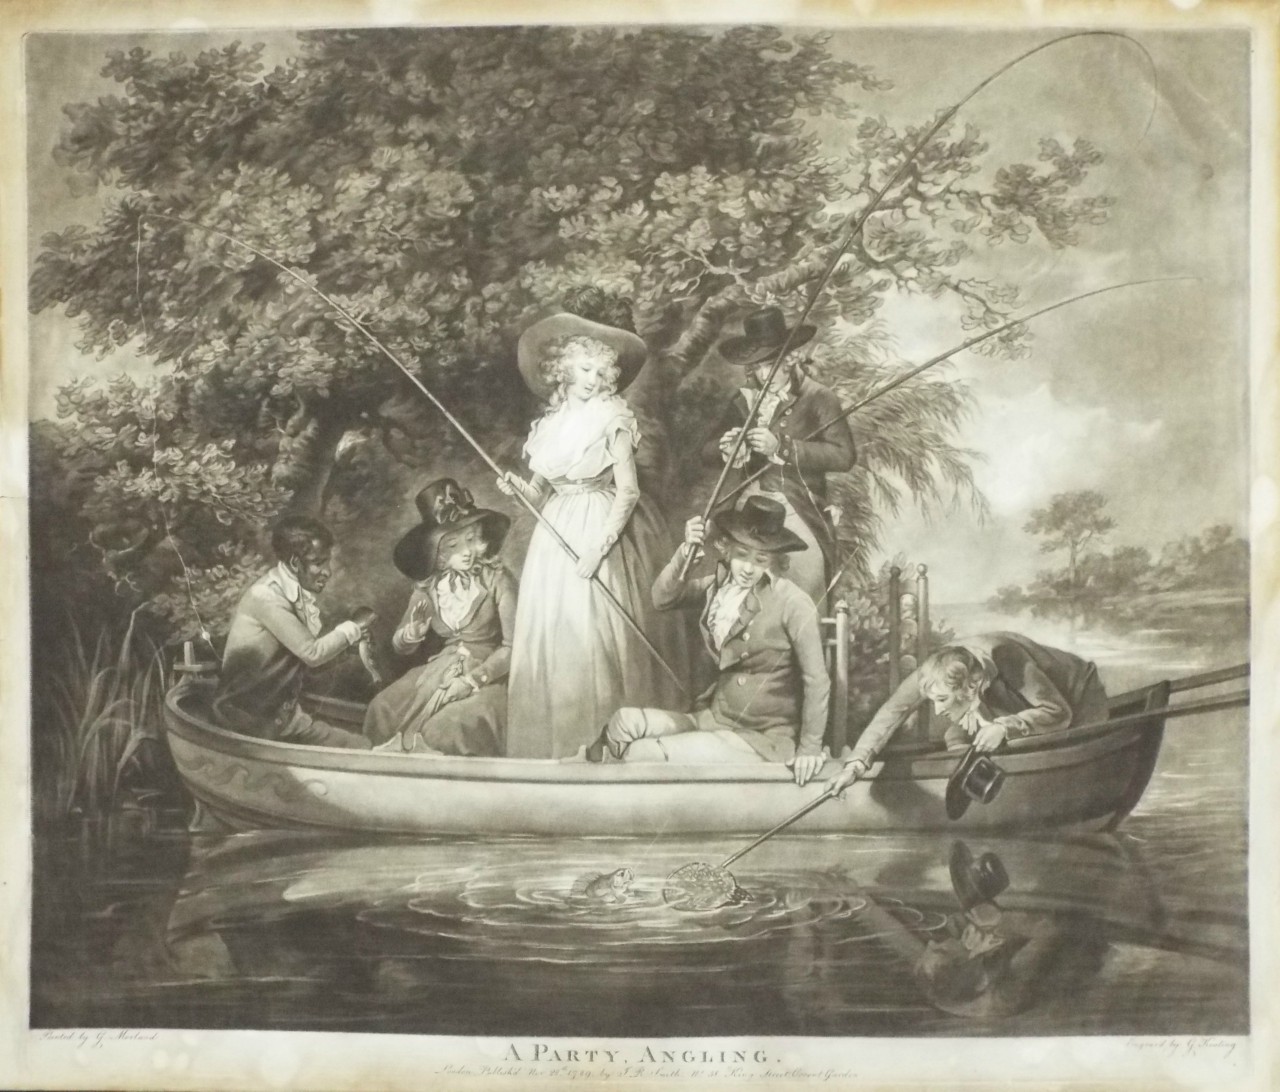 Mezzotint - A Party Angling. - Keating